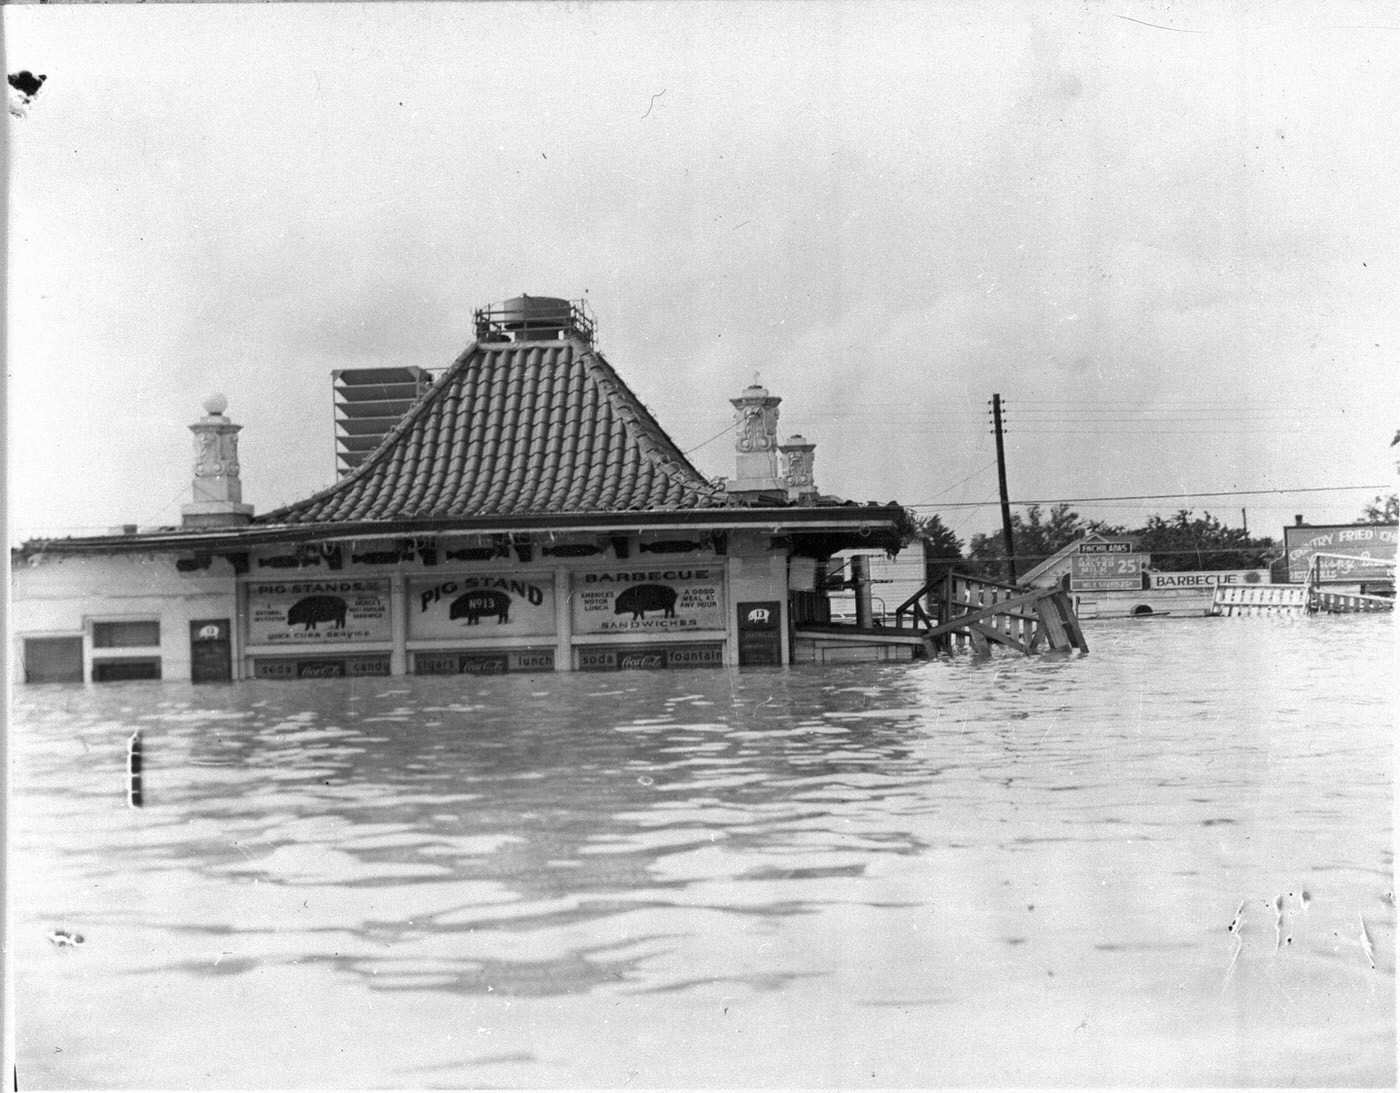 Pig Stand restaurant partially under water during the May 1949 flood in Fort Worth, Texas, 1949